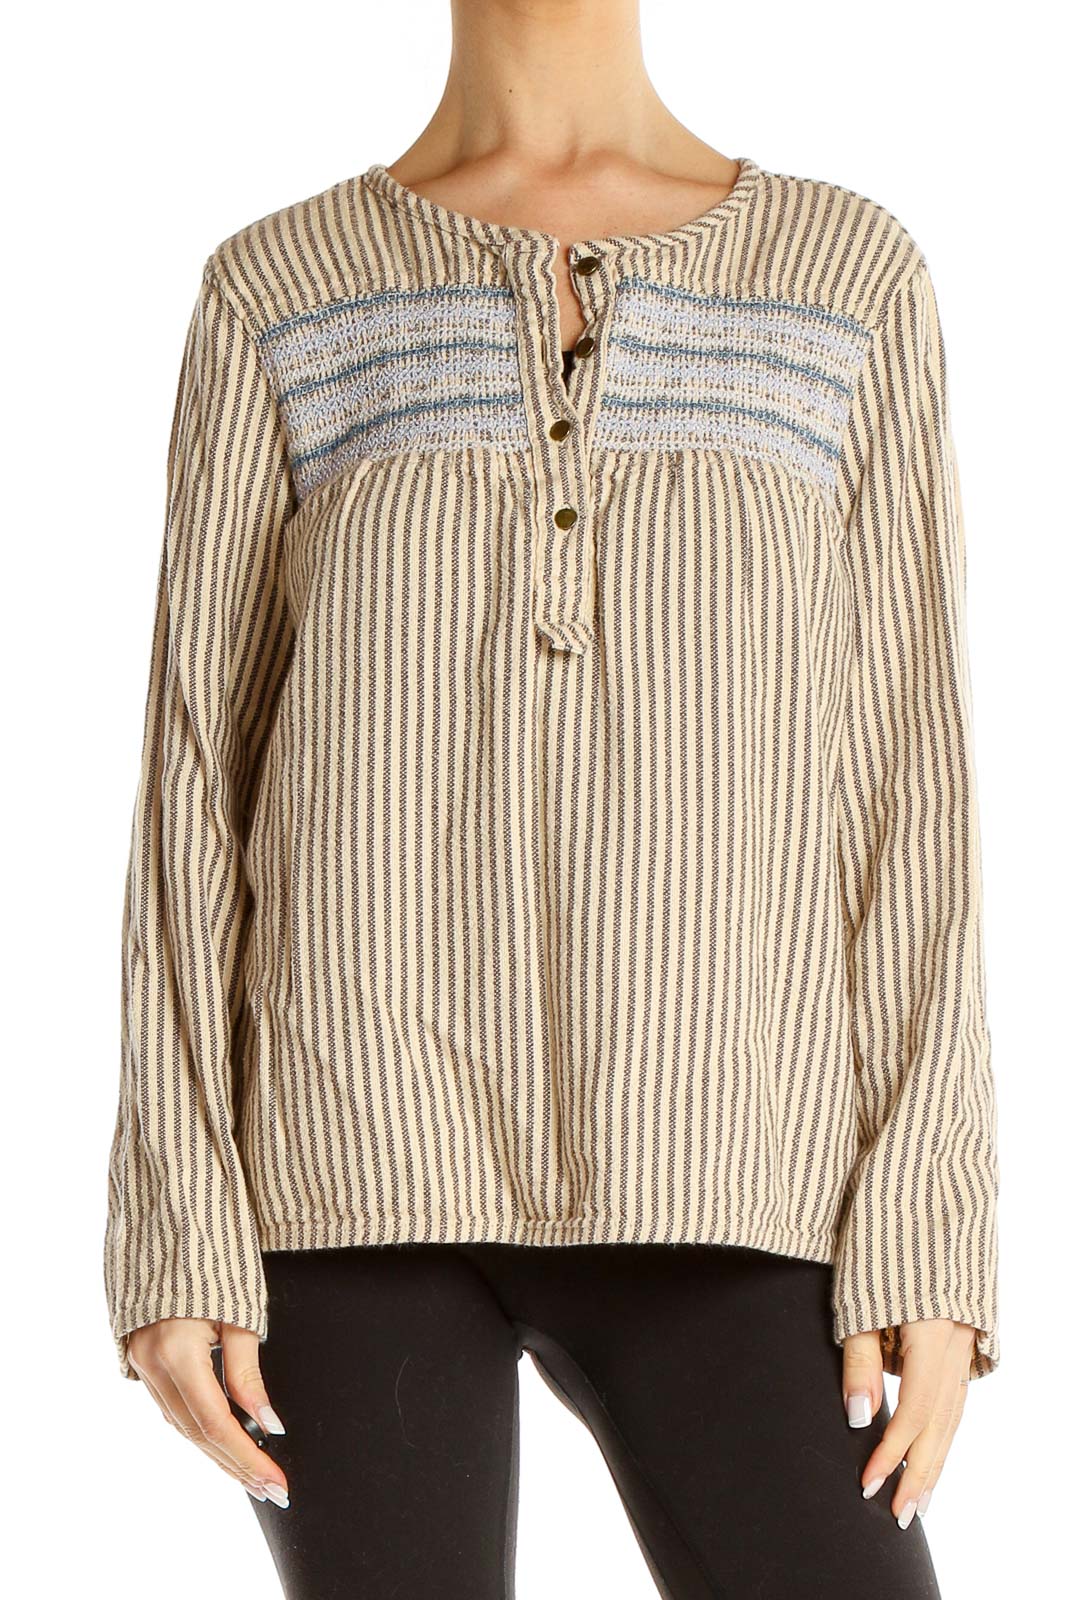 Brown Striped Embroidered Top Front